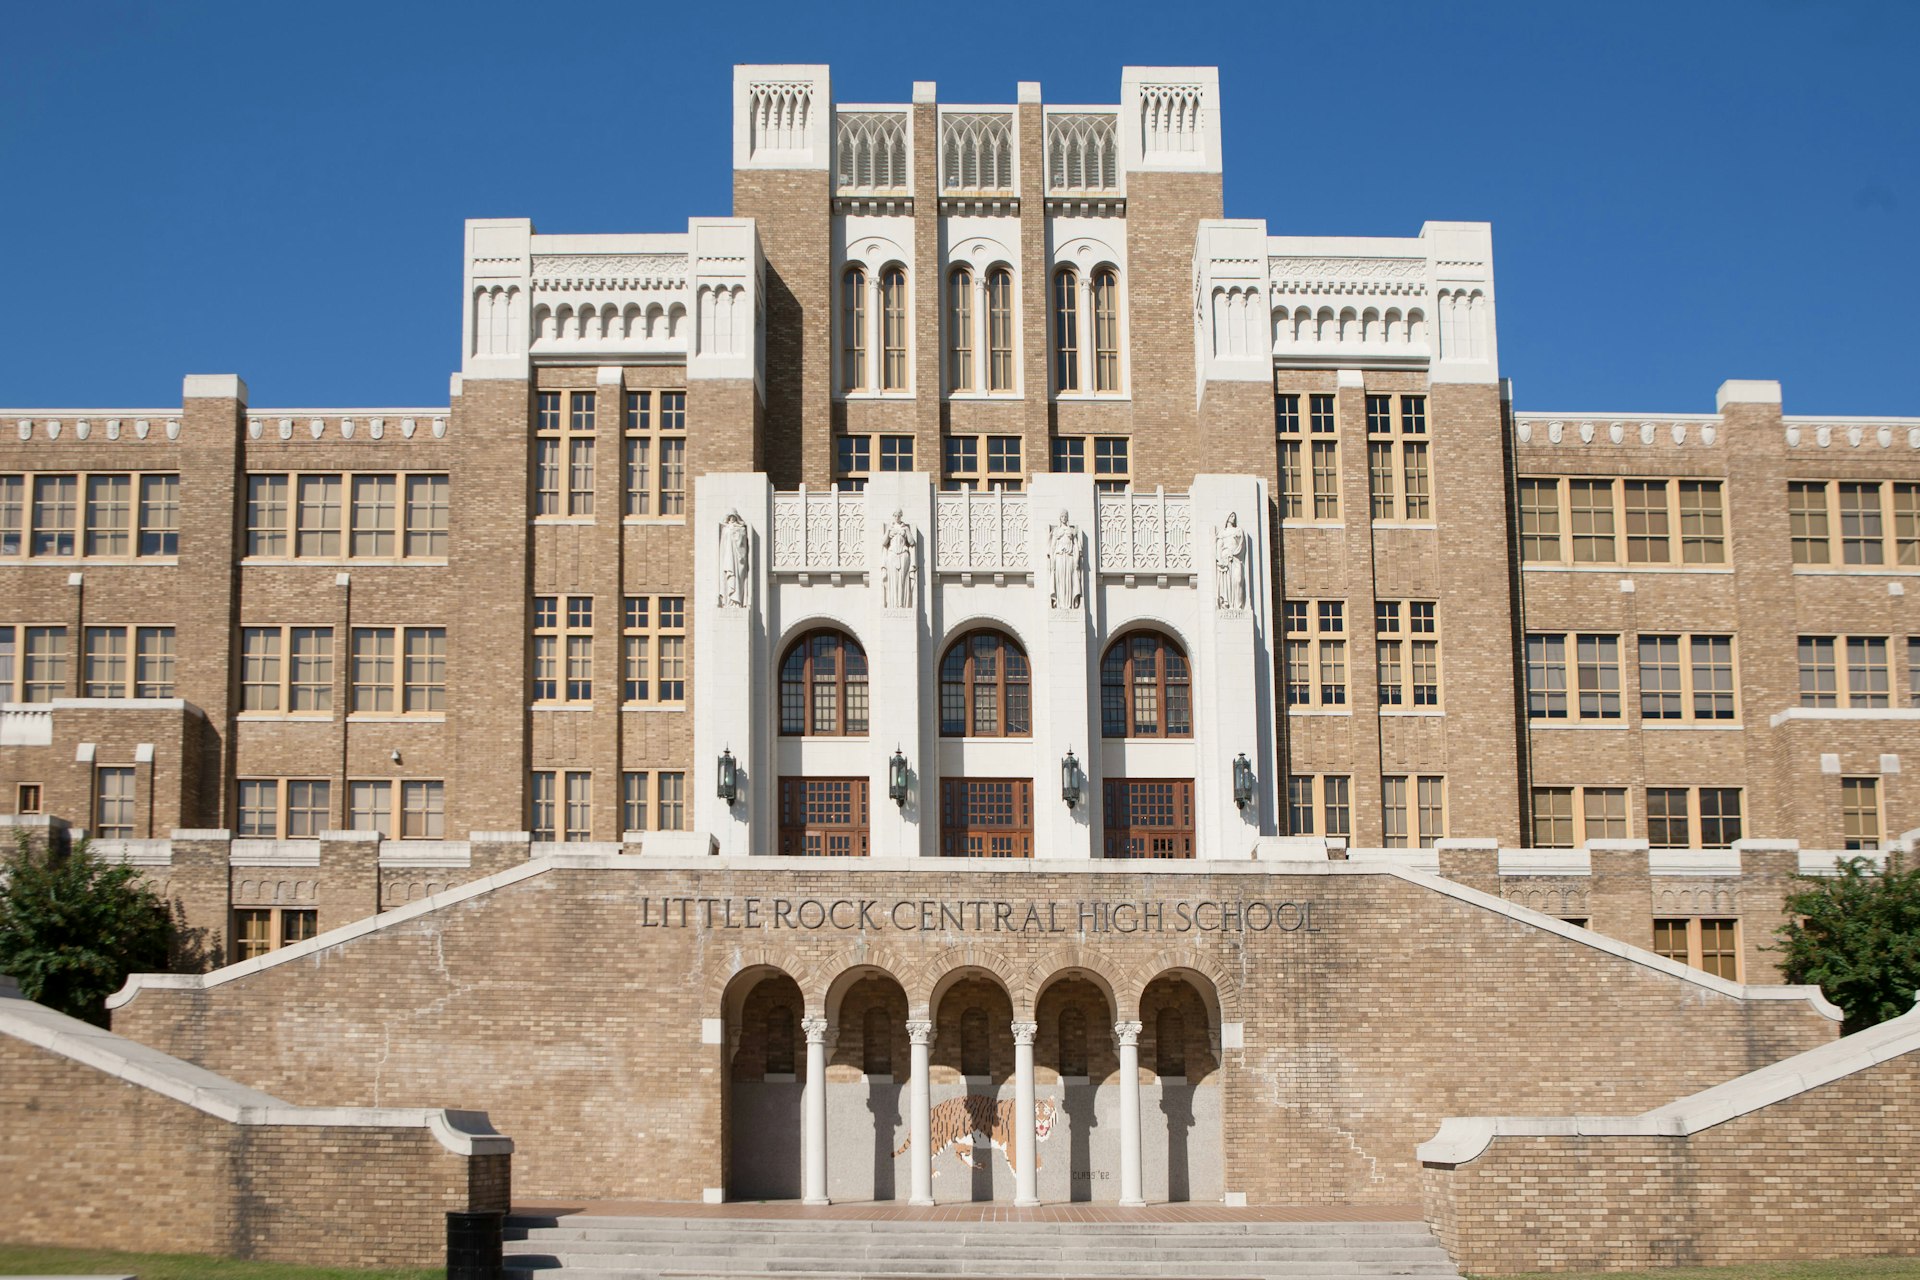 The brick exterior of Little Rock Central High School, with a row of four large statues above the doors and a mural of a tiger beneath the steps 